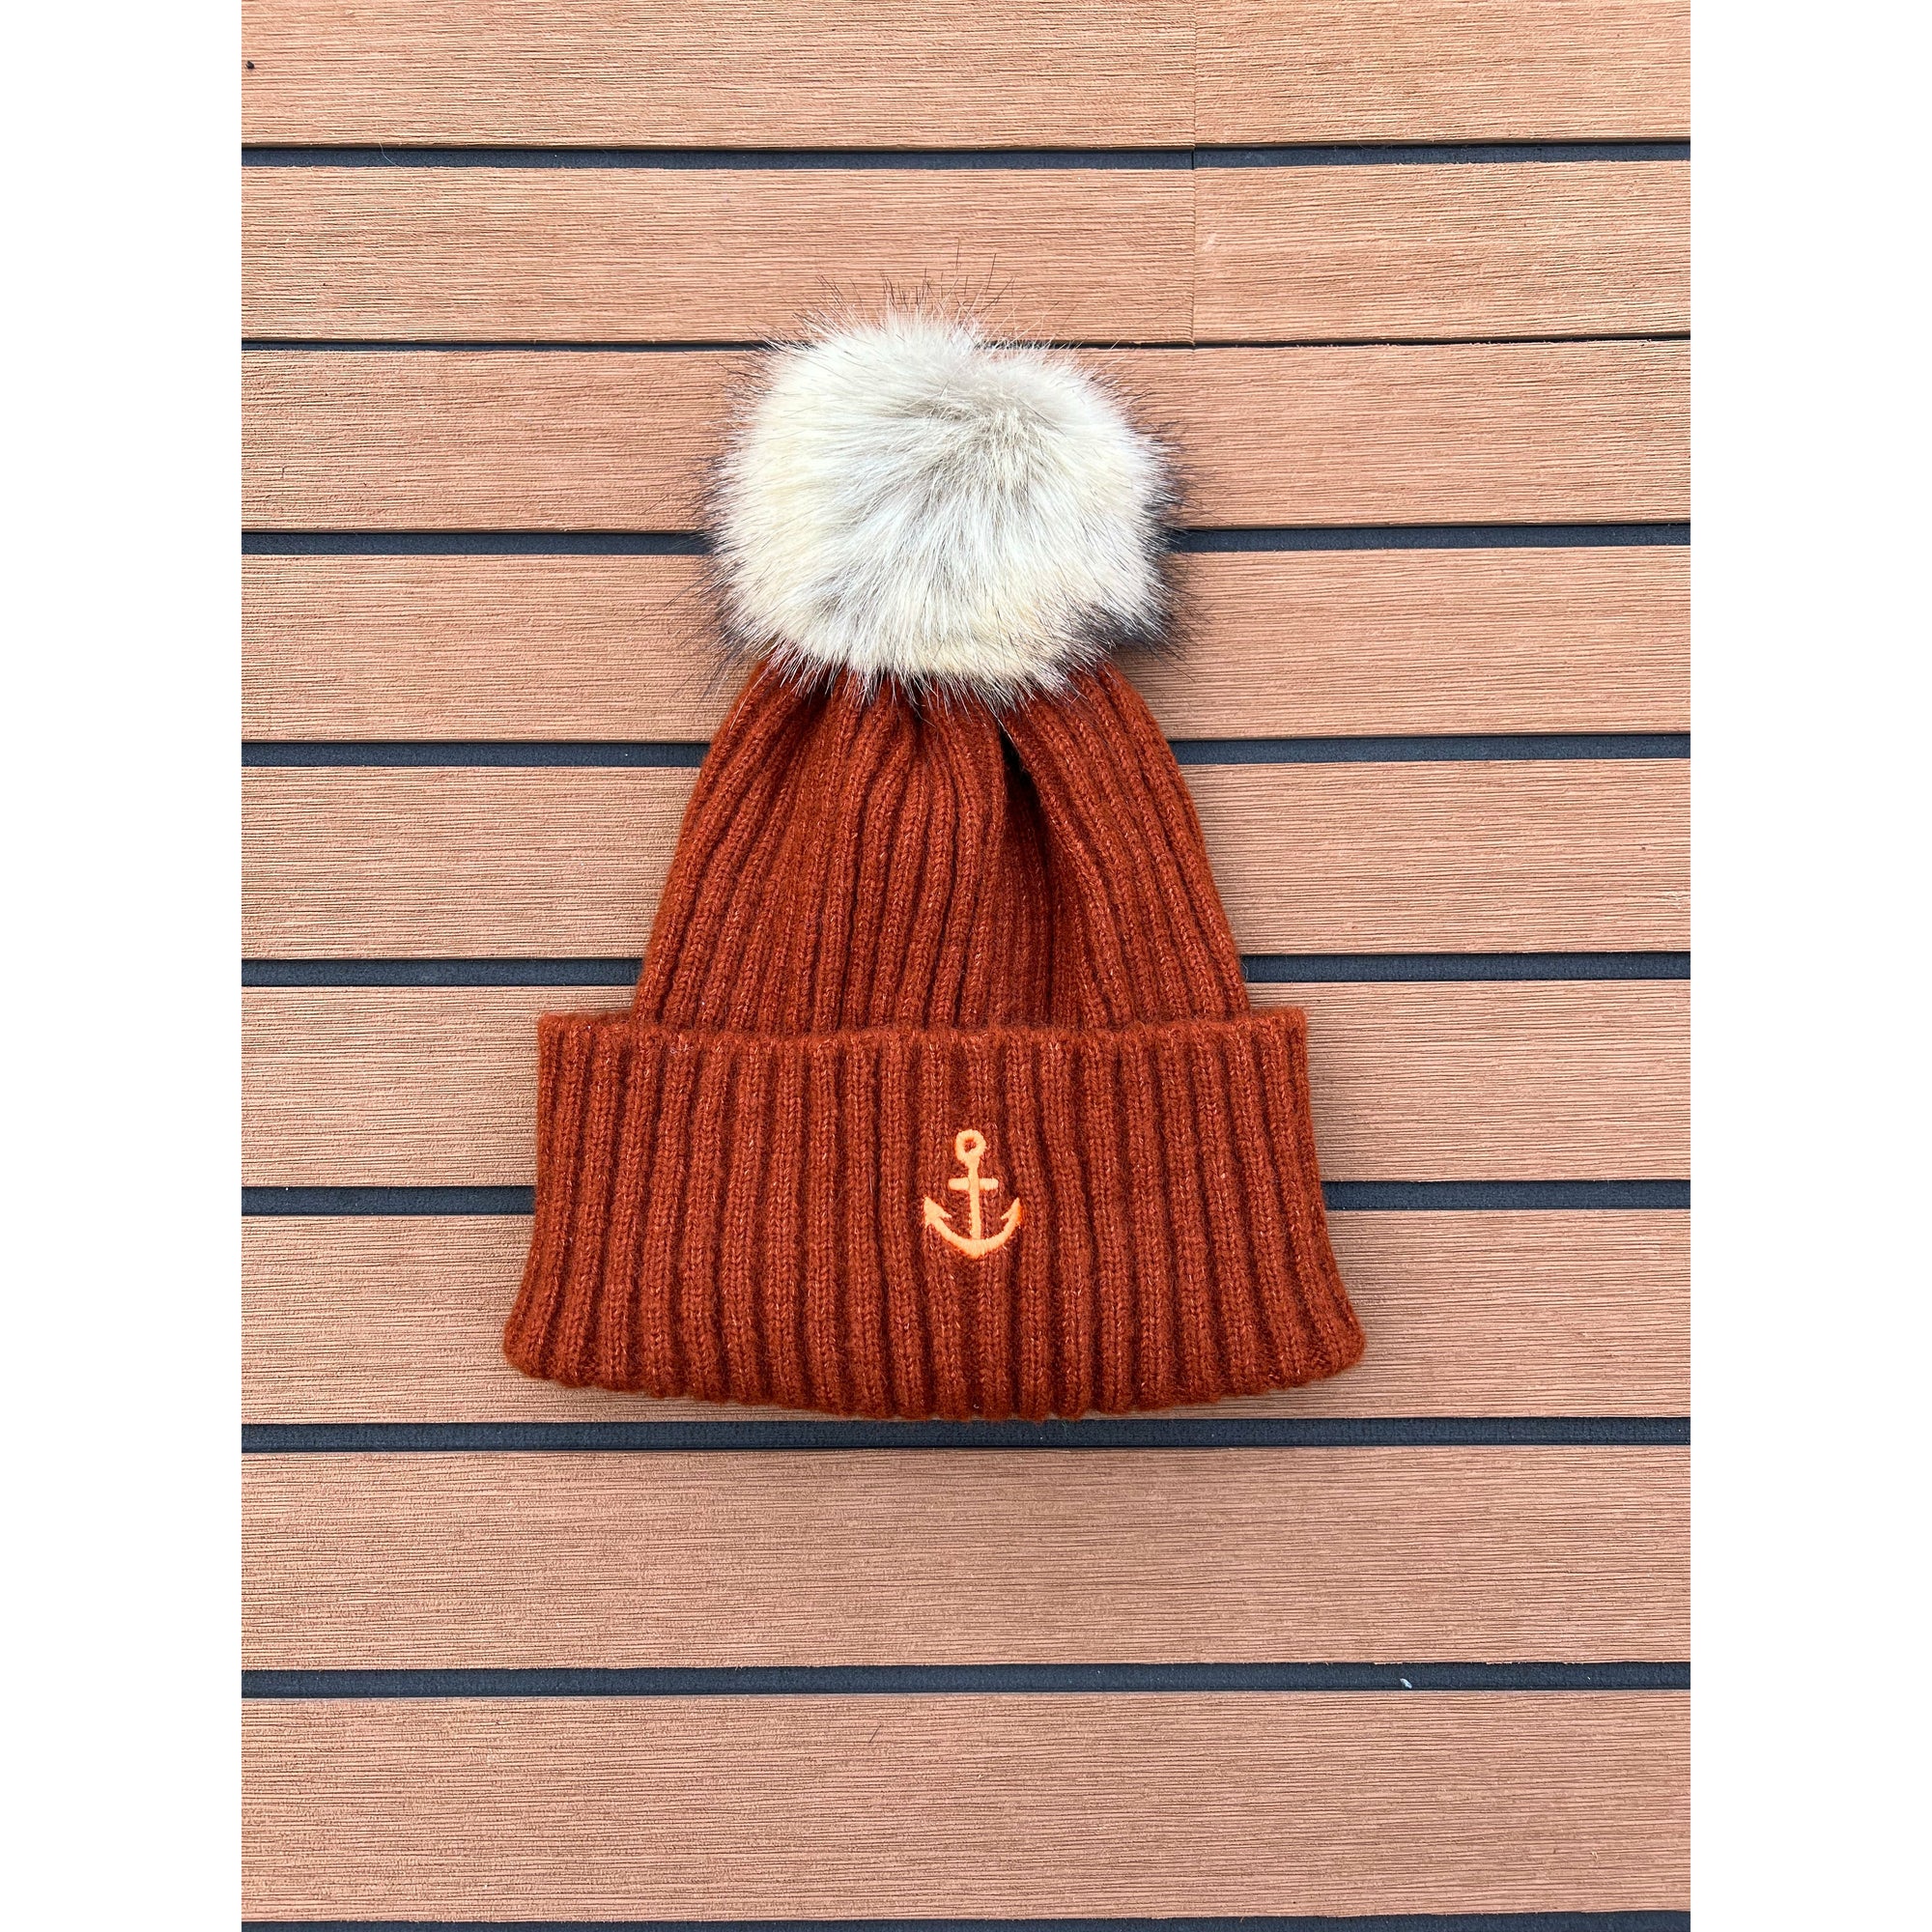 FORCE 10 OFFICIAL BOBBLE HAT - BROWN